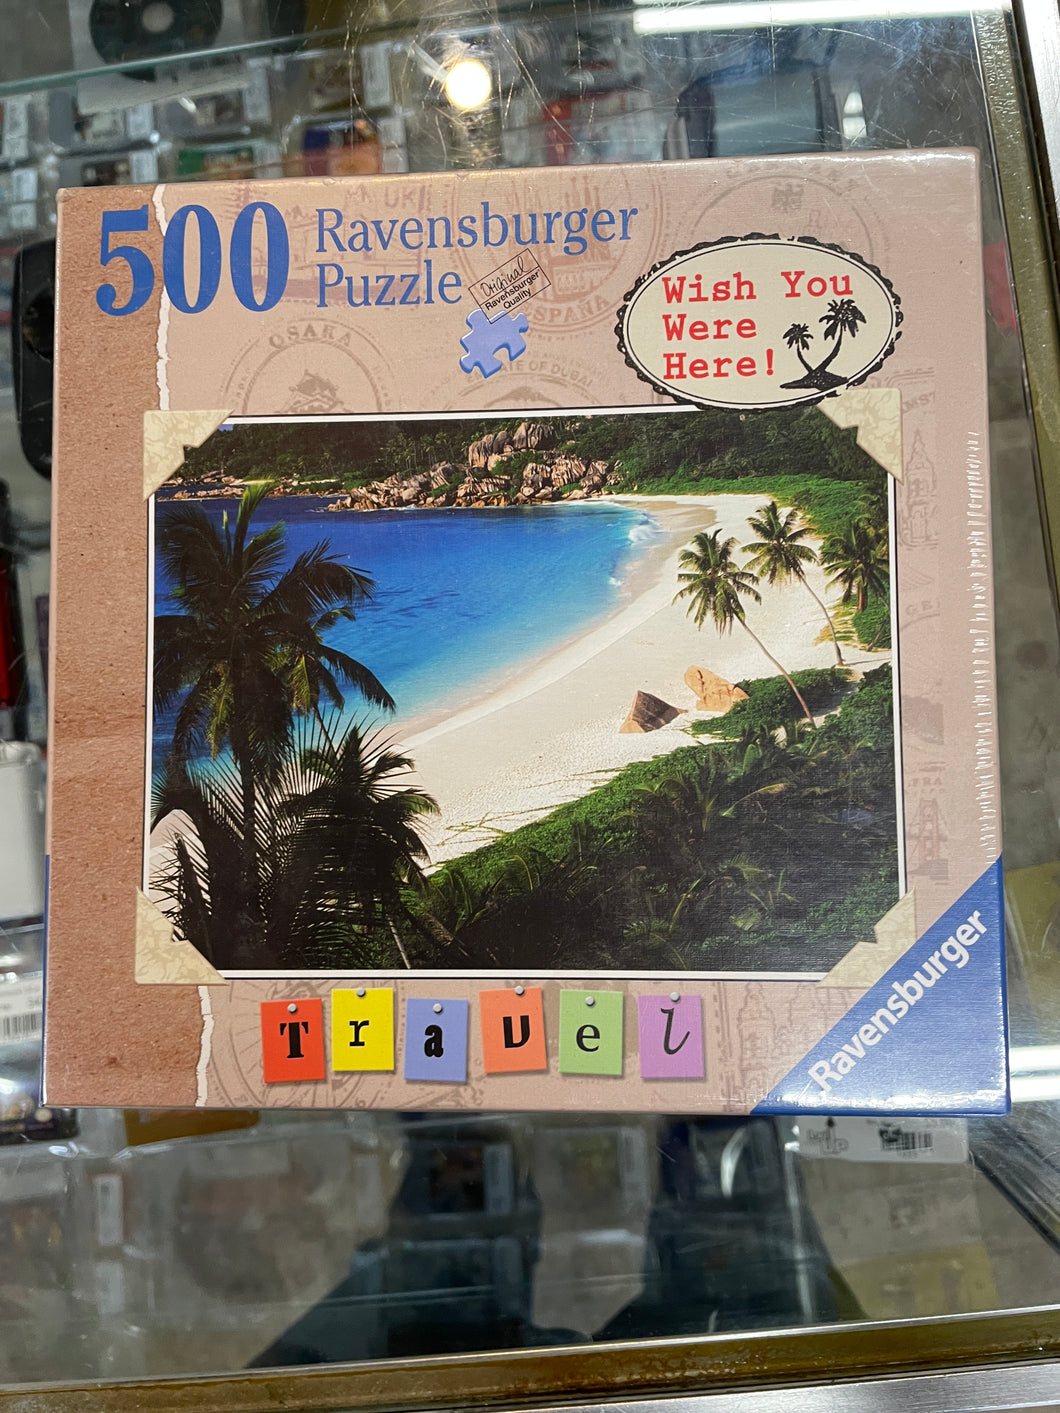 Ravensburger 500 Piece Puzzle Tropical Paradise Travel Wish You Were Here